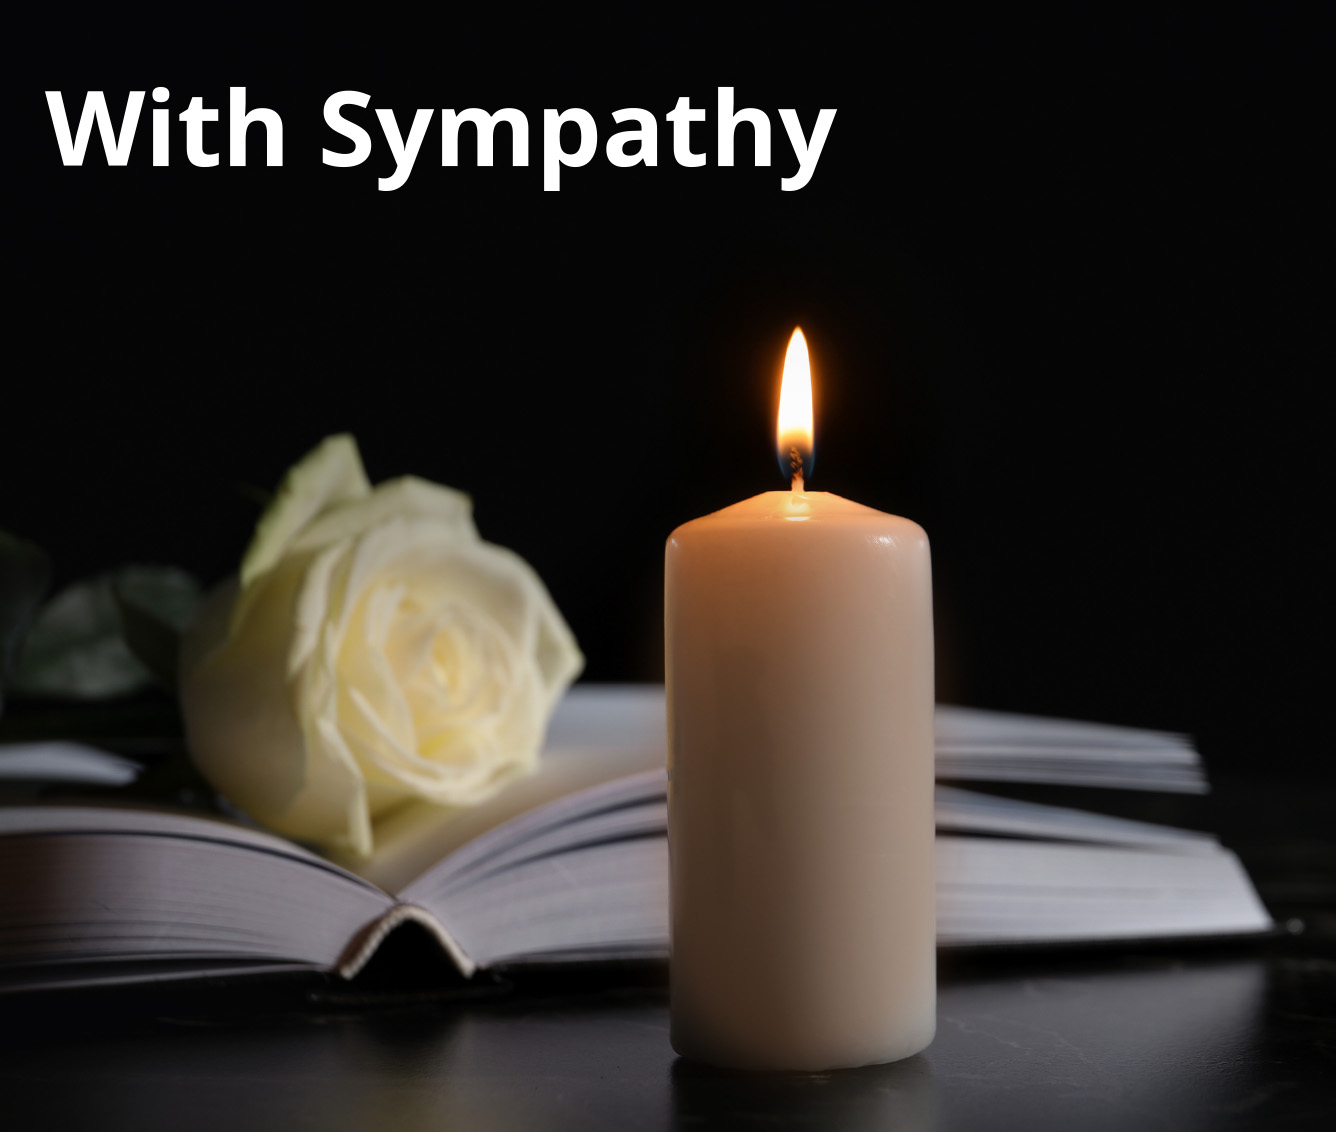 bible with lit candle and white rose. With Sympathy 